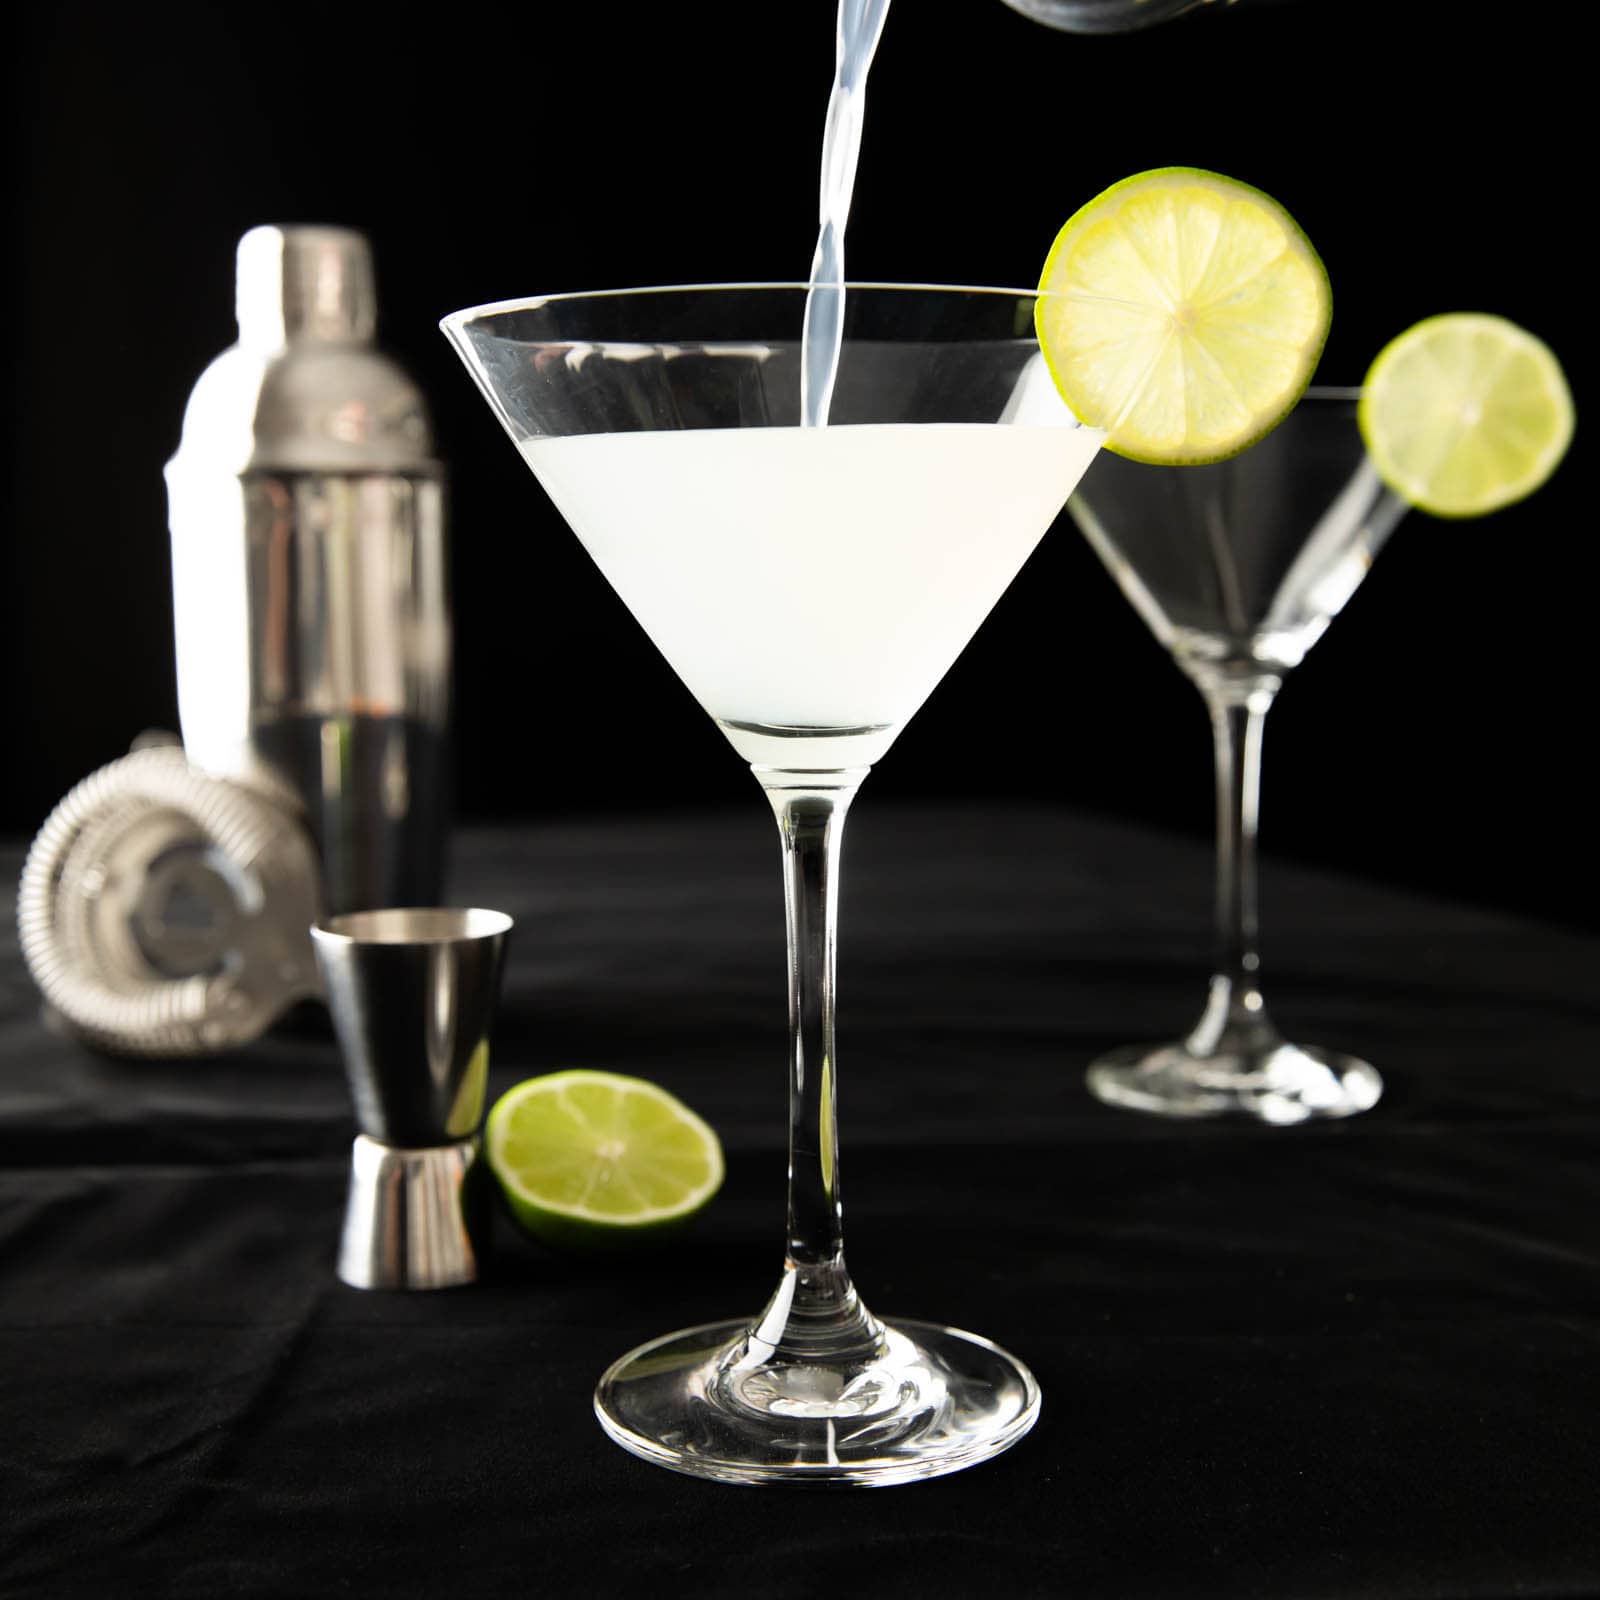 Pouring Gimlet cocktail mixture from a cocktail shaker into a glass with a lime wedge garnish